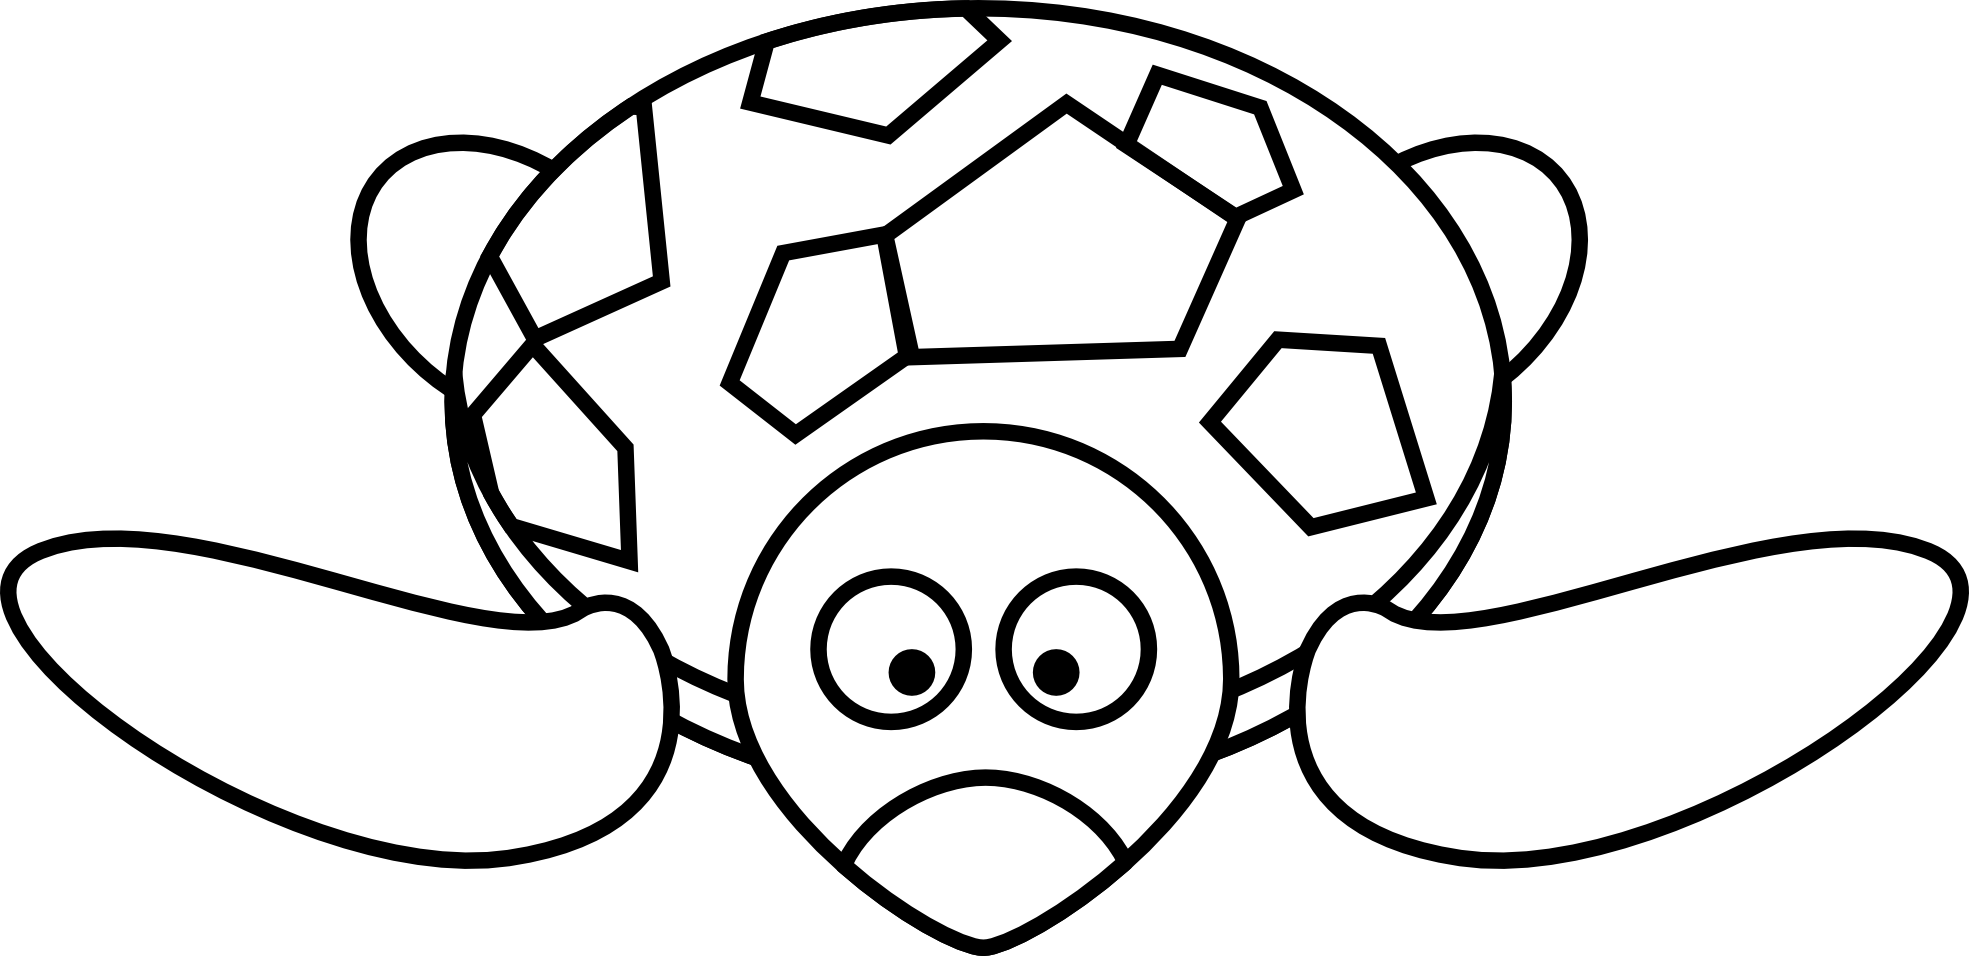 Turtle Black And White Clipart